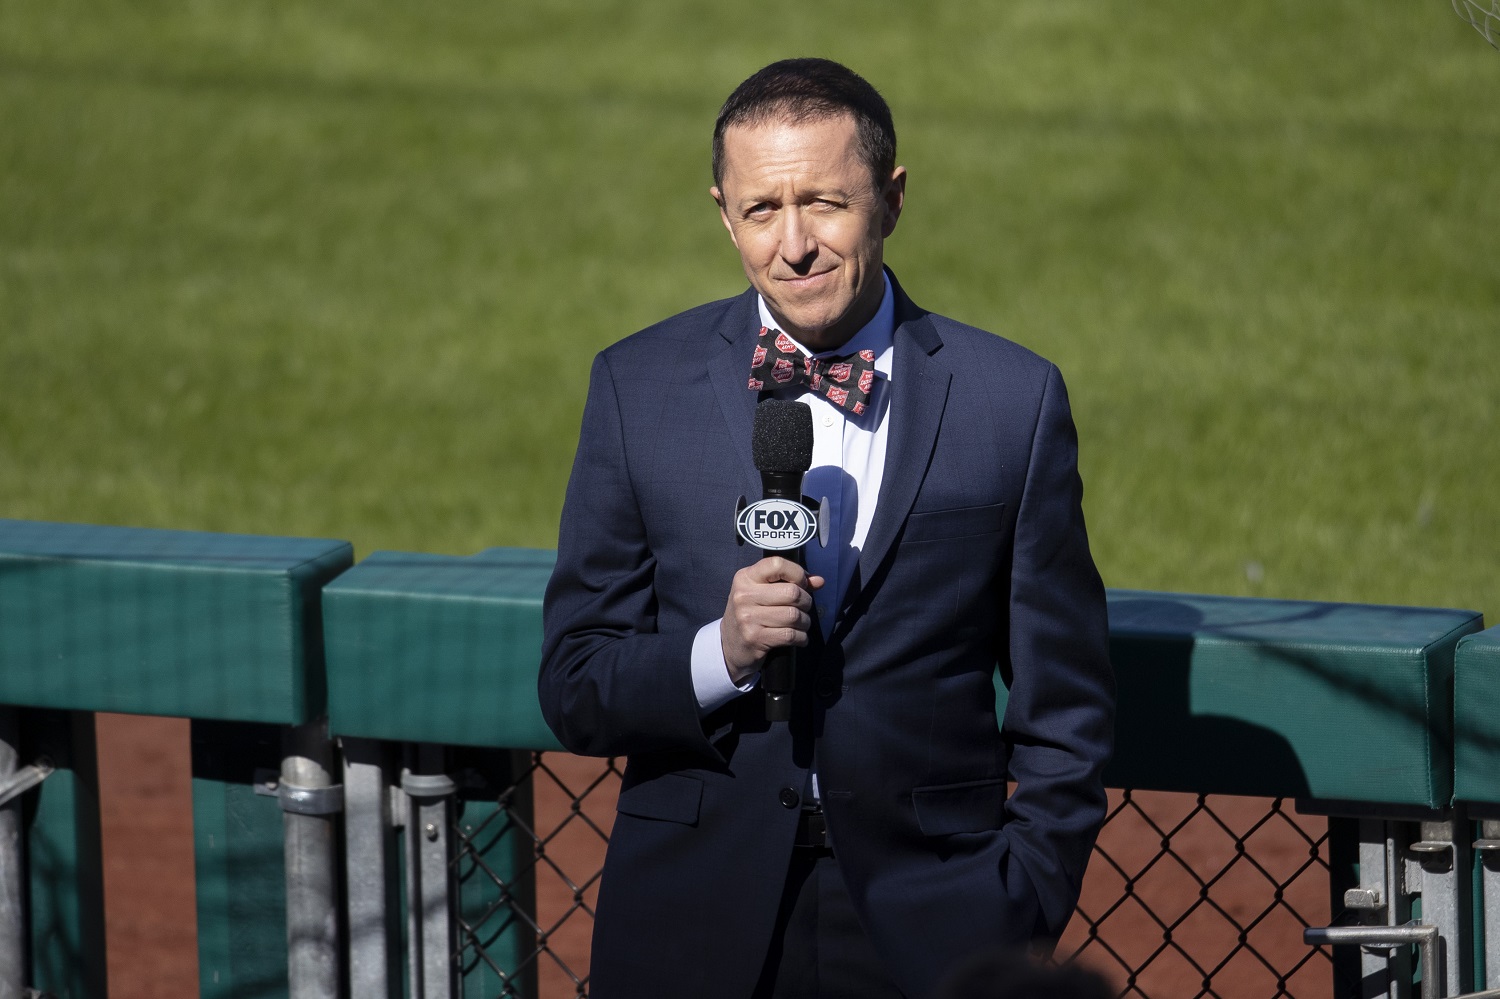 Ken Rosenthal looks on during the game between the Philadelphia Phillies and Atlanta Braves while reporting for Fox Sports at Citizens Bank Park on April 3, 2021. Mitchell Leff/Getty Images